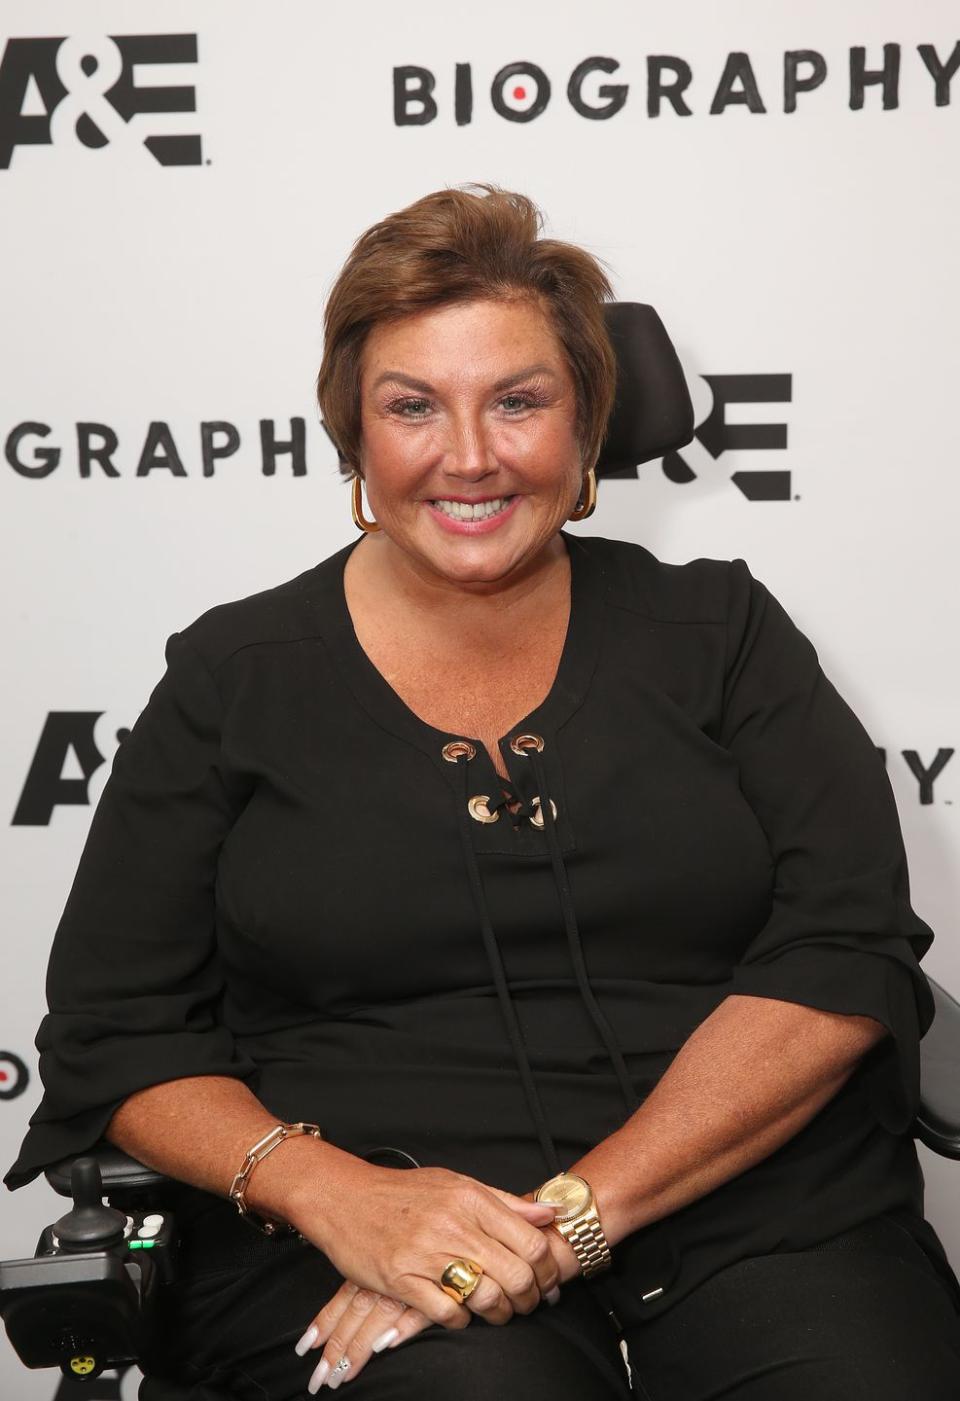 Now: Abby Lee Miller